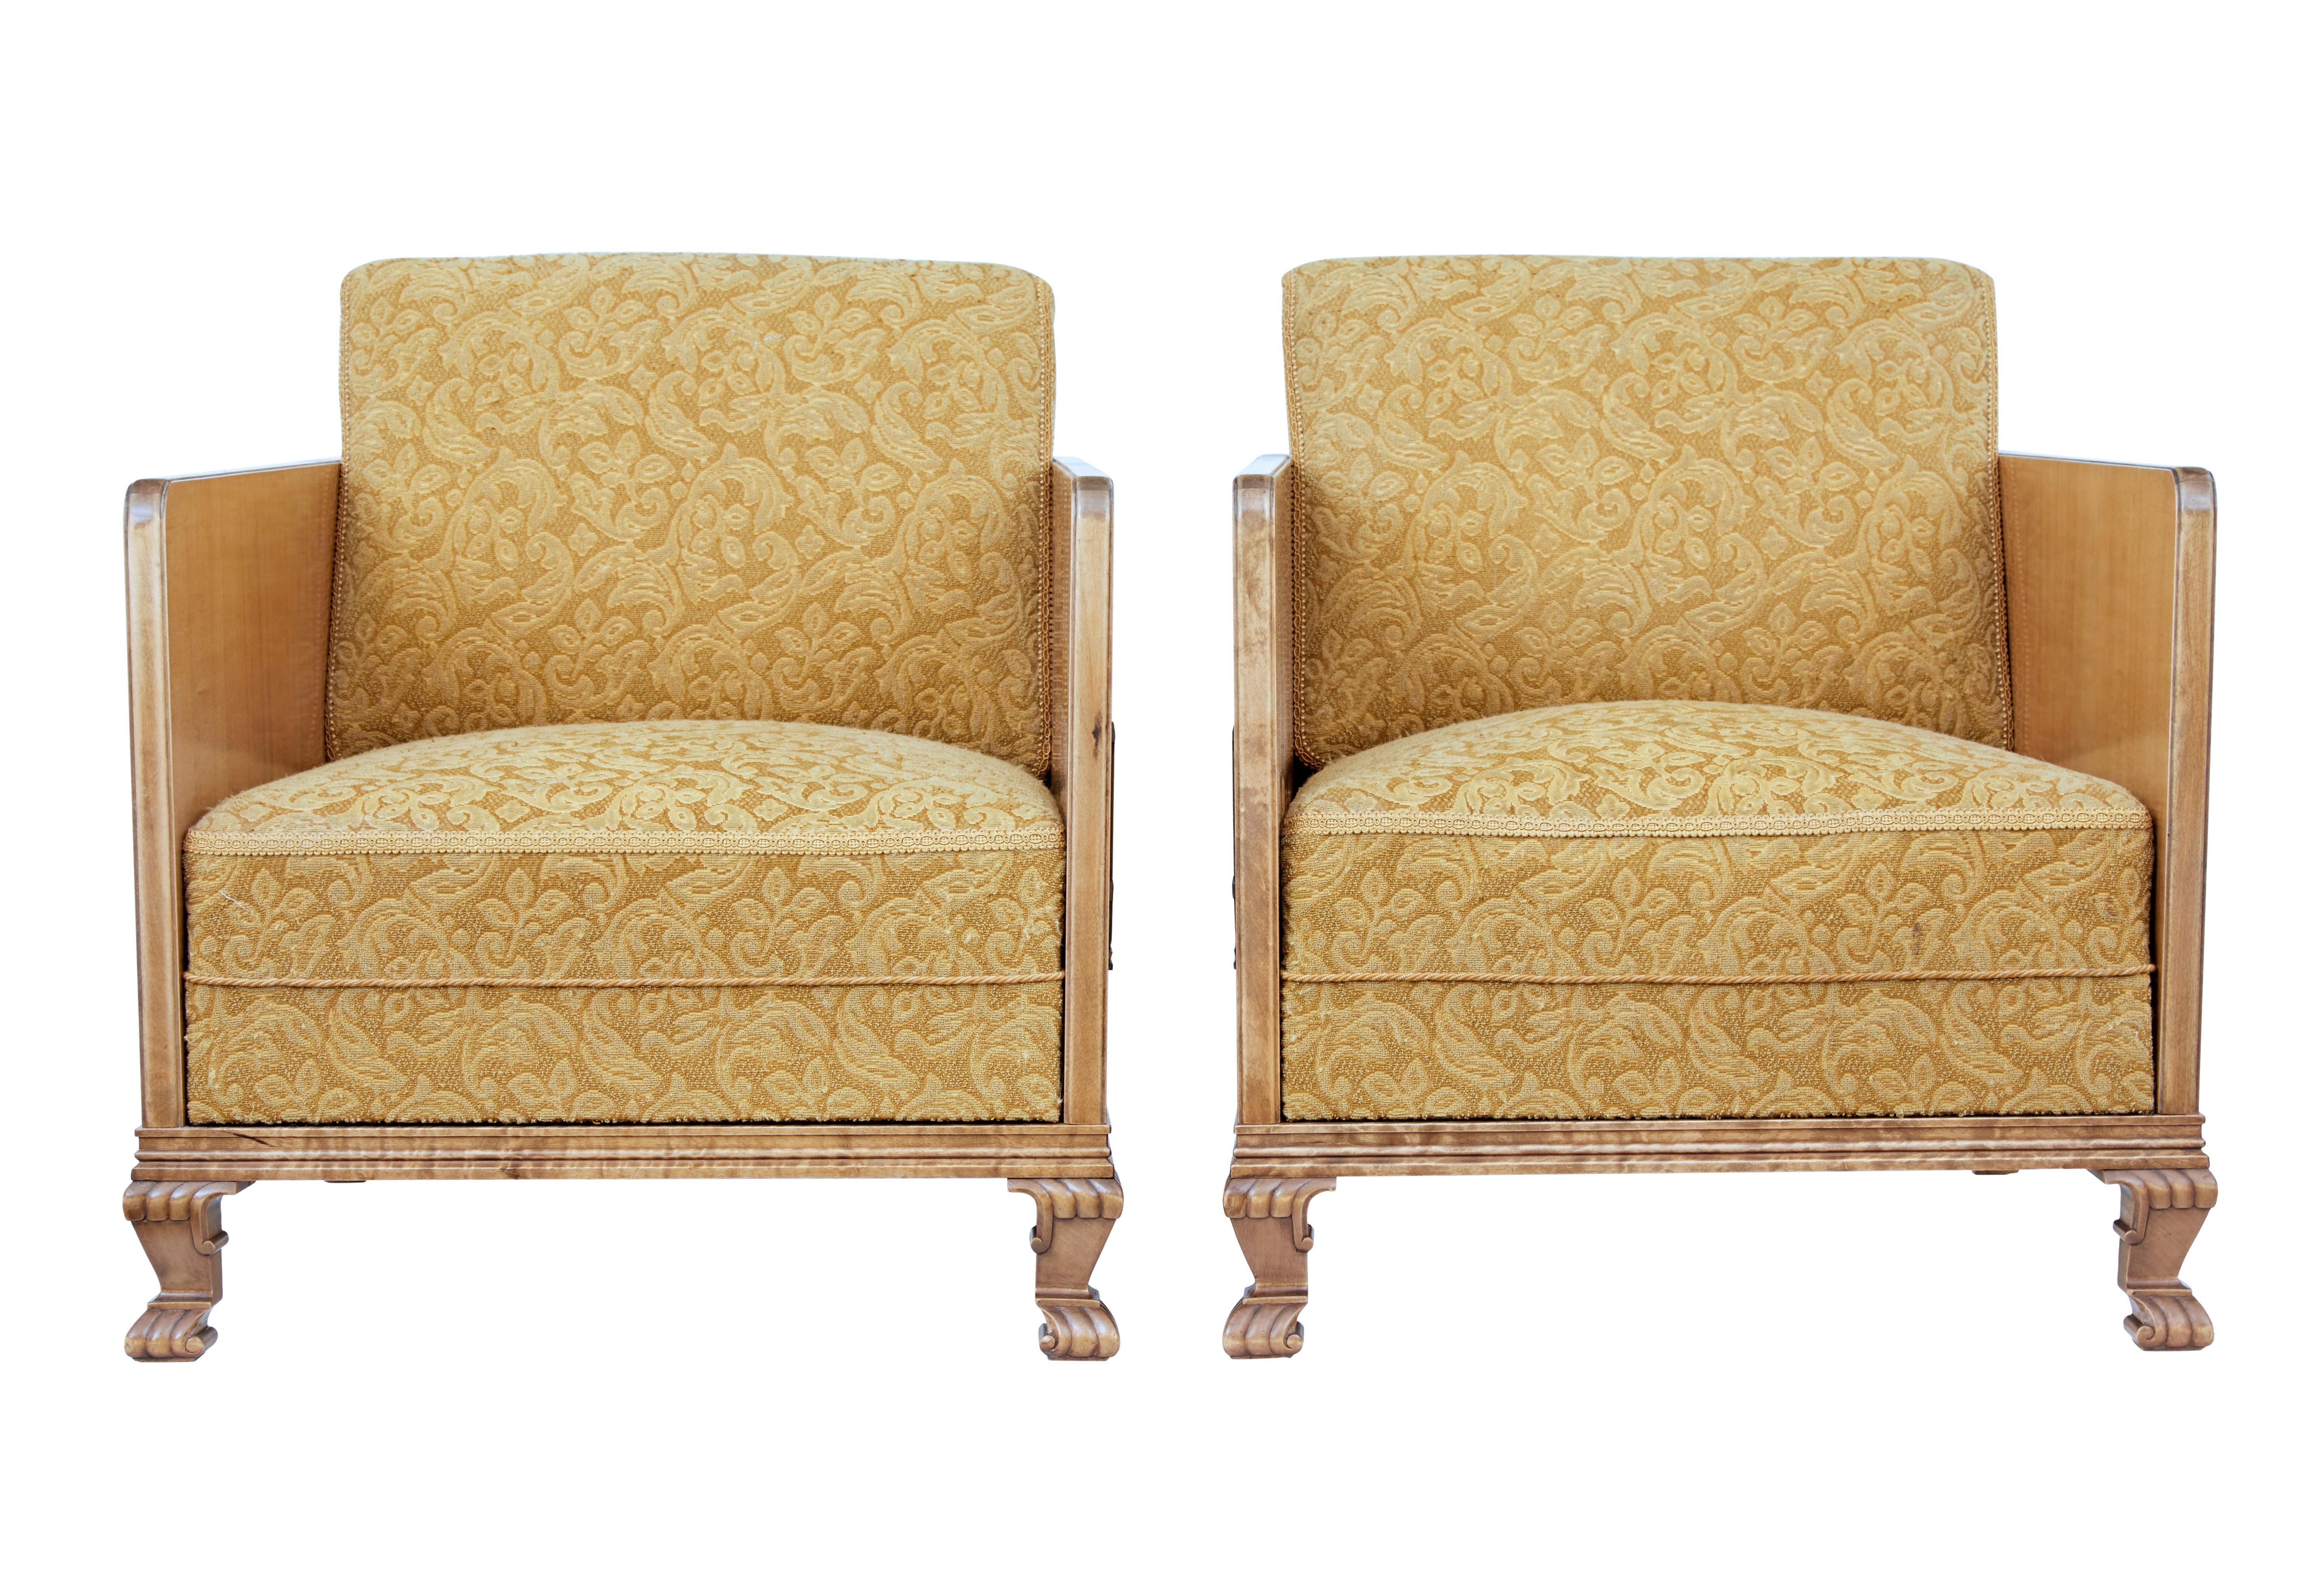 Fine quality pair of Scandinavian elm armchairs, circa 1930.

Thin elm side frame with mahogany stringing and contrasting walnut detail, complete with applied stained birch motif. Standing on front carved paw feet.

Original upholstery is in